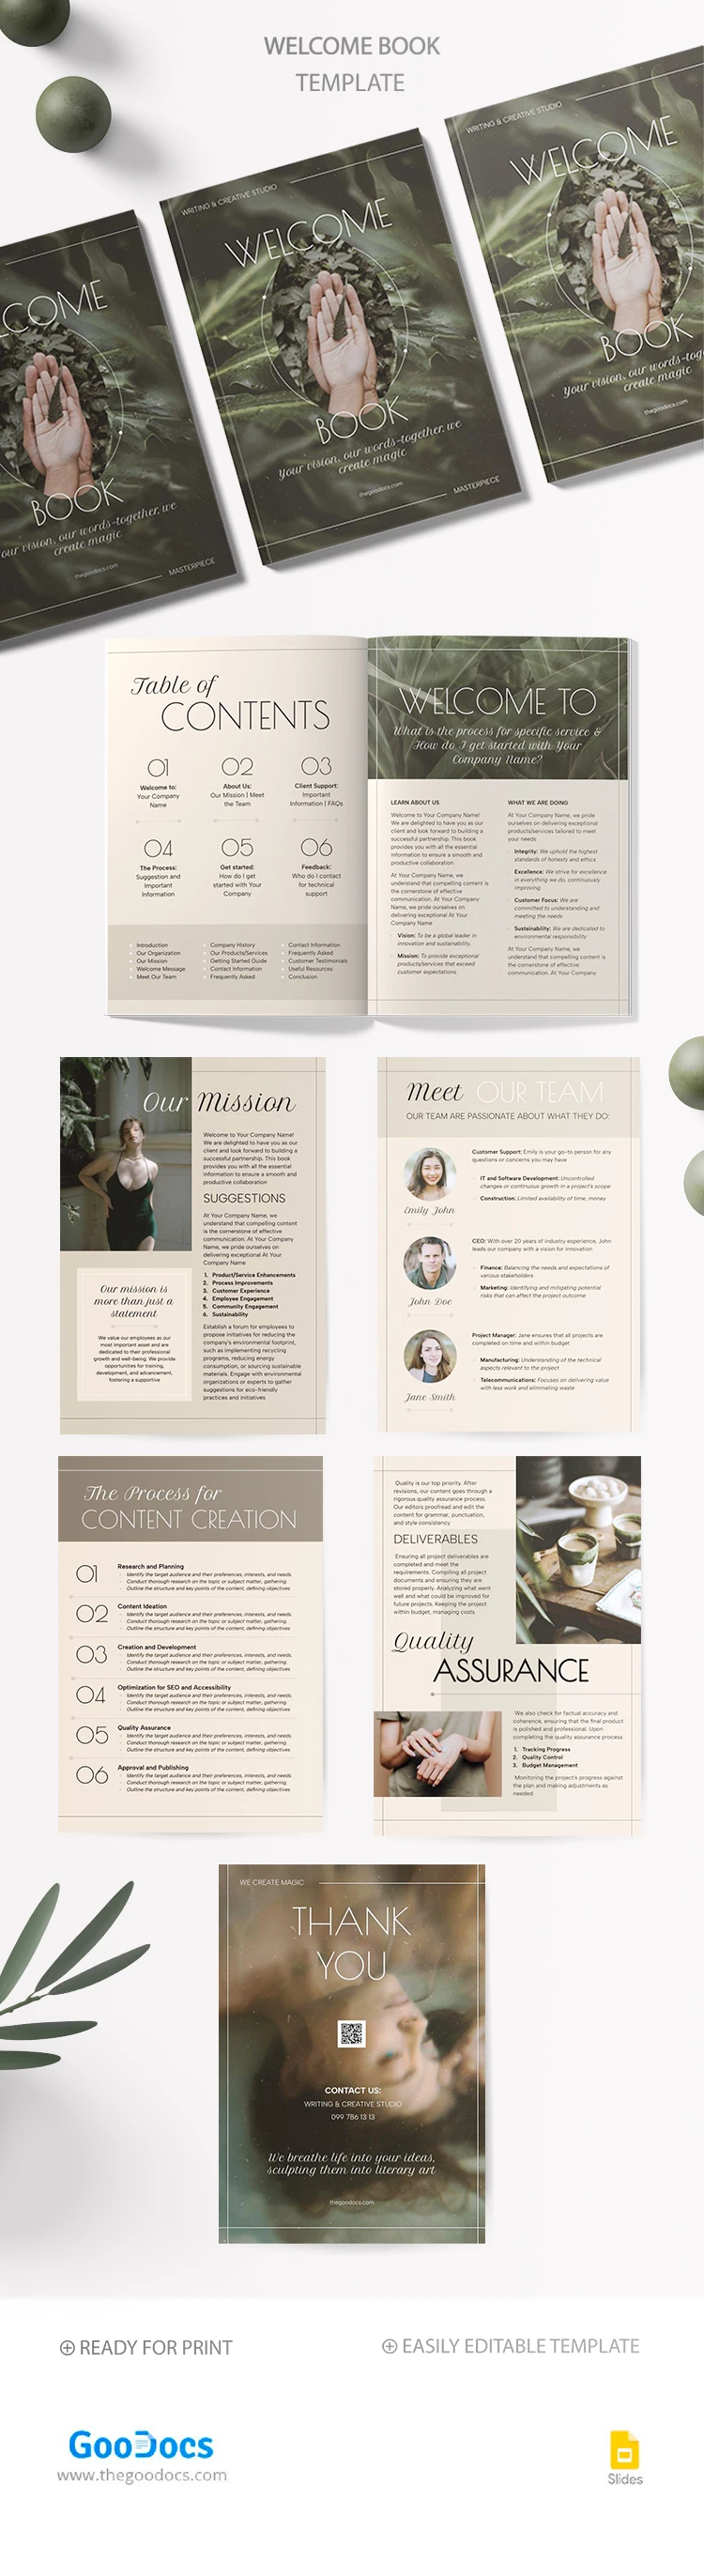 Client Welcome Book - free Google Docs Template - 10068741